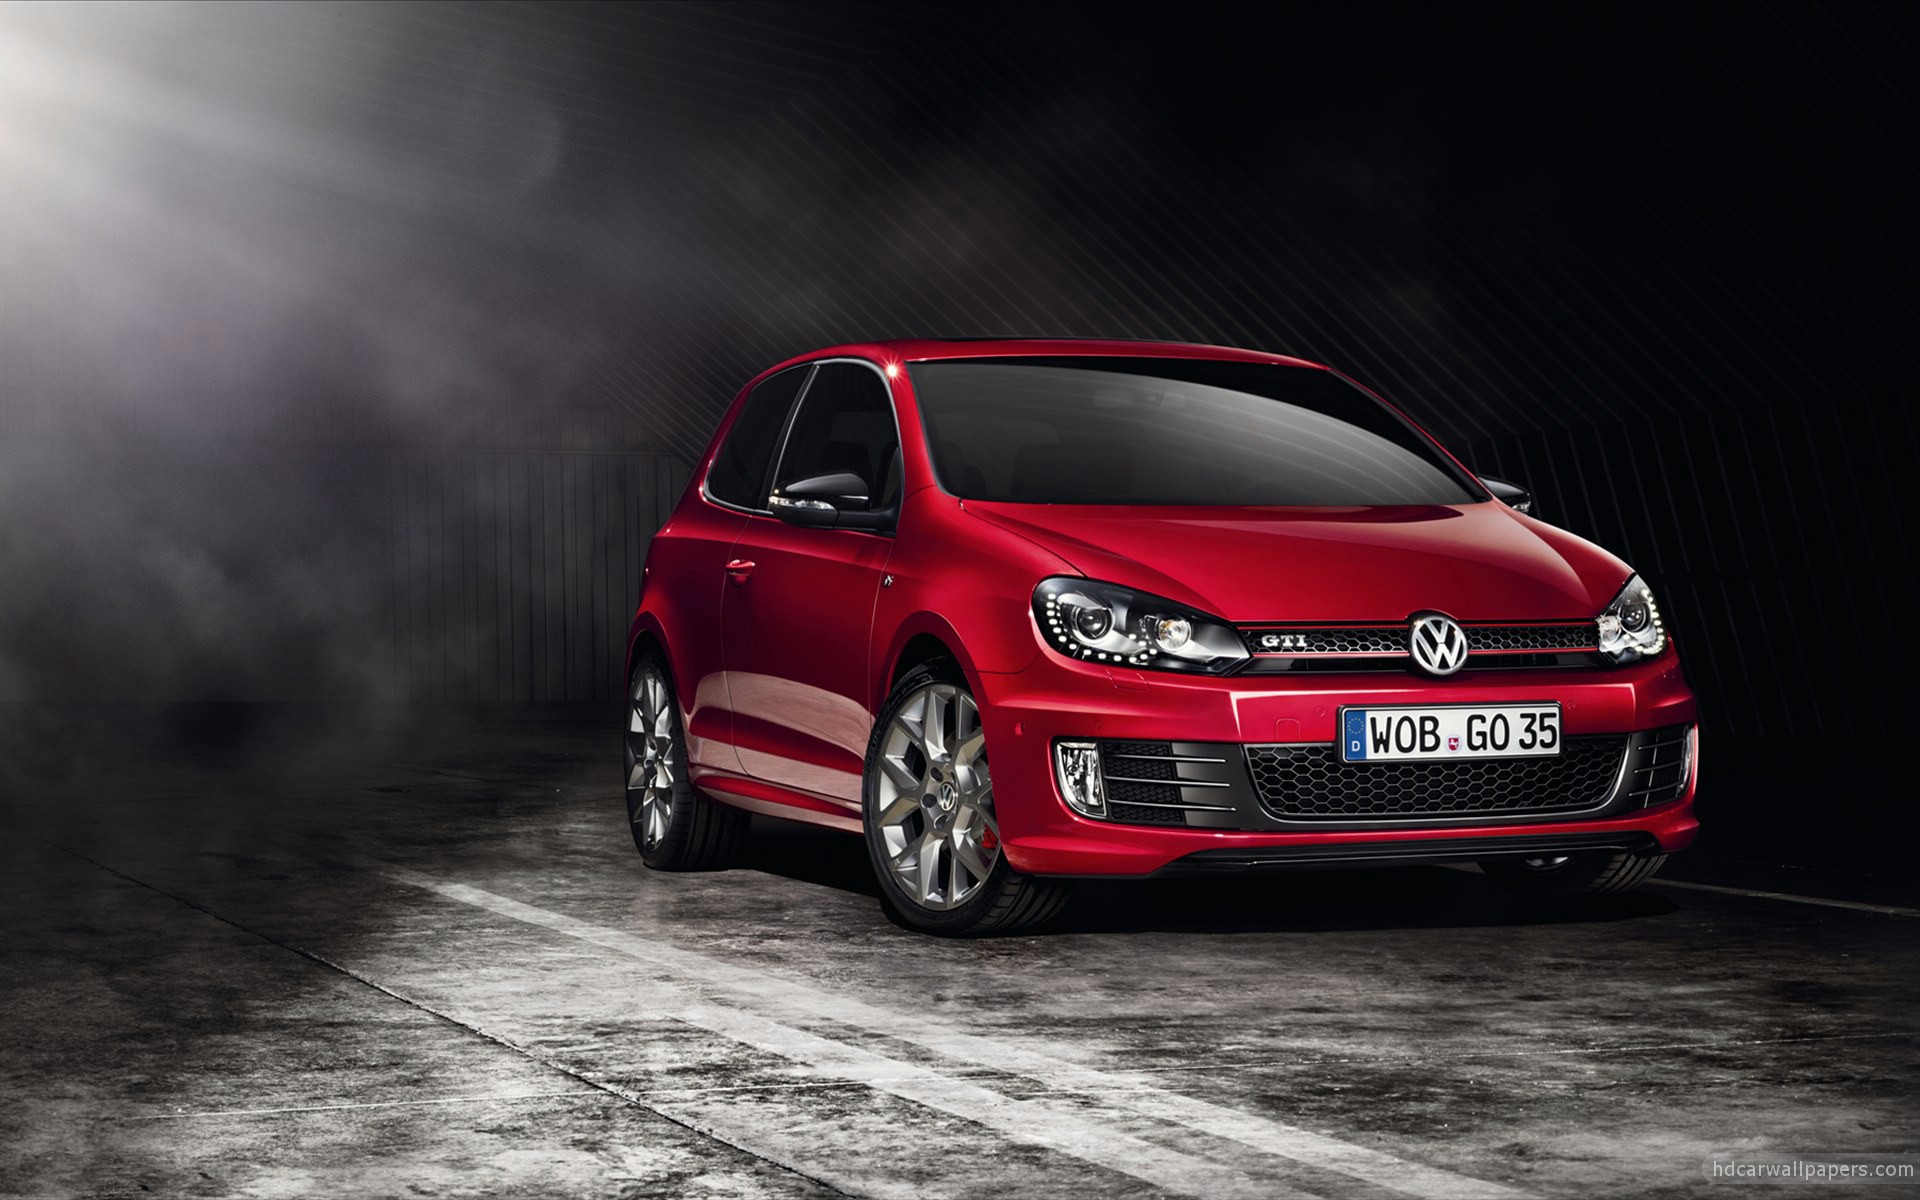 Volkswagen Golf Wallpapers High Quality | Download Free